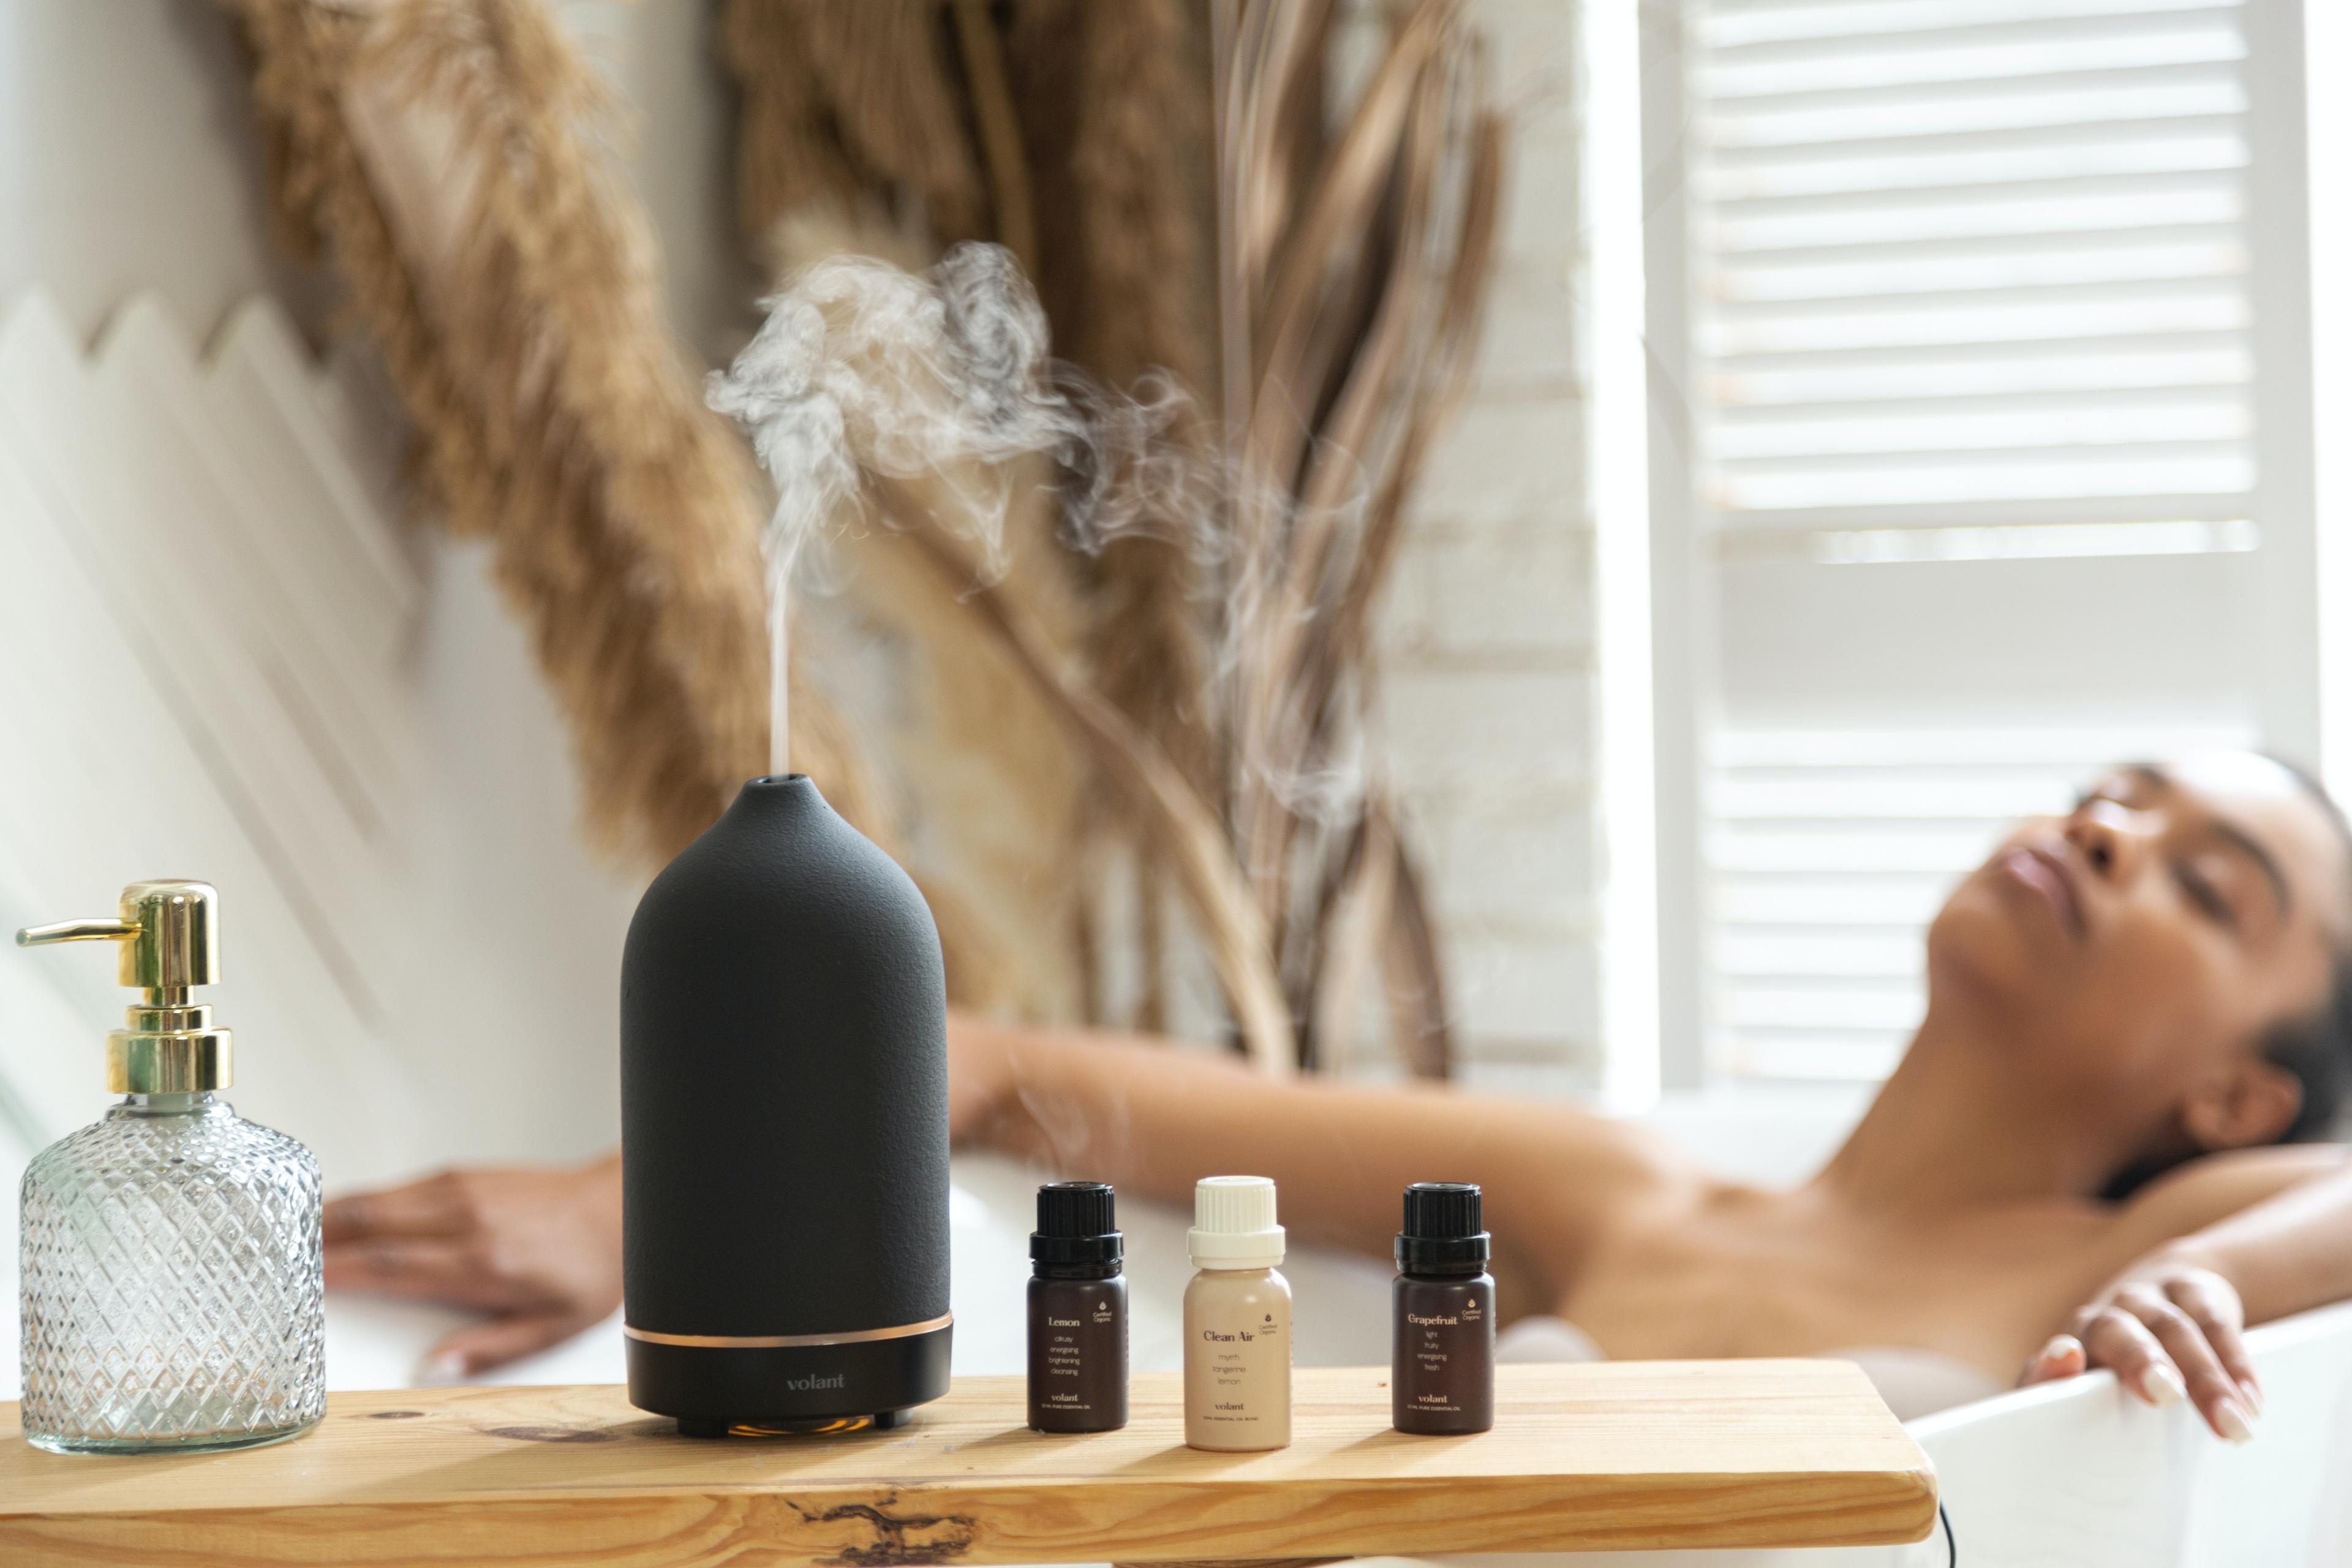 The Essence of Aromatherapy: Tools, Techniques, and Benefits. What Are Essential Oils?